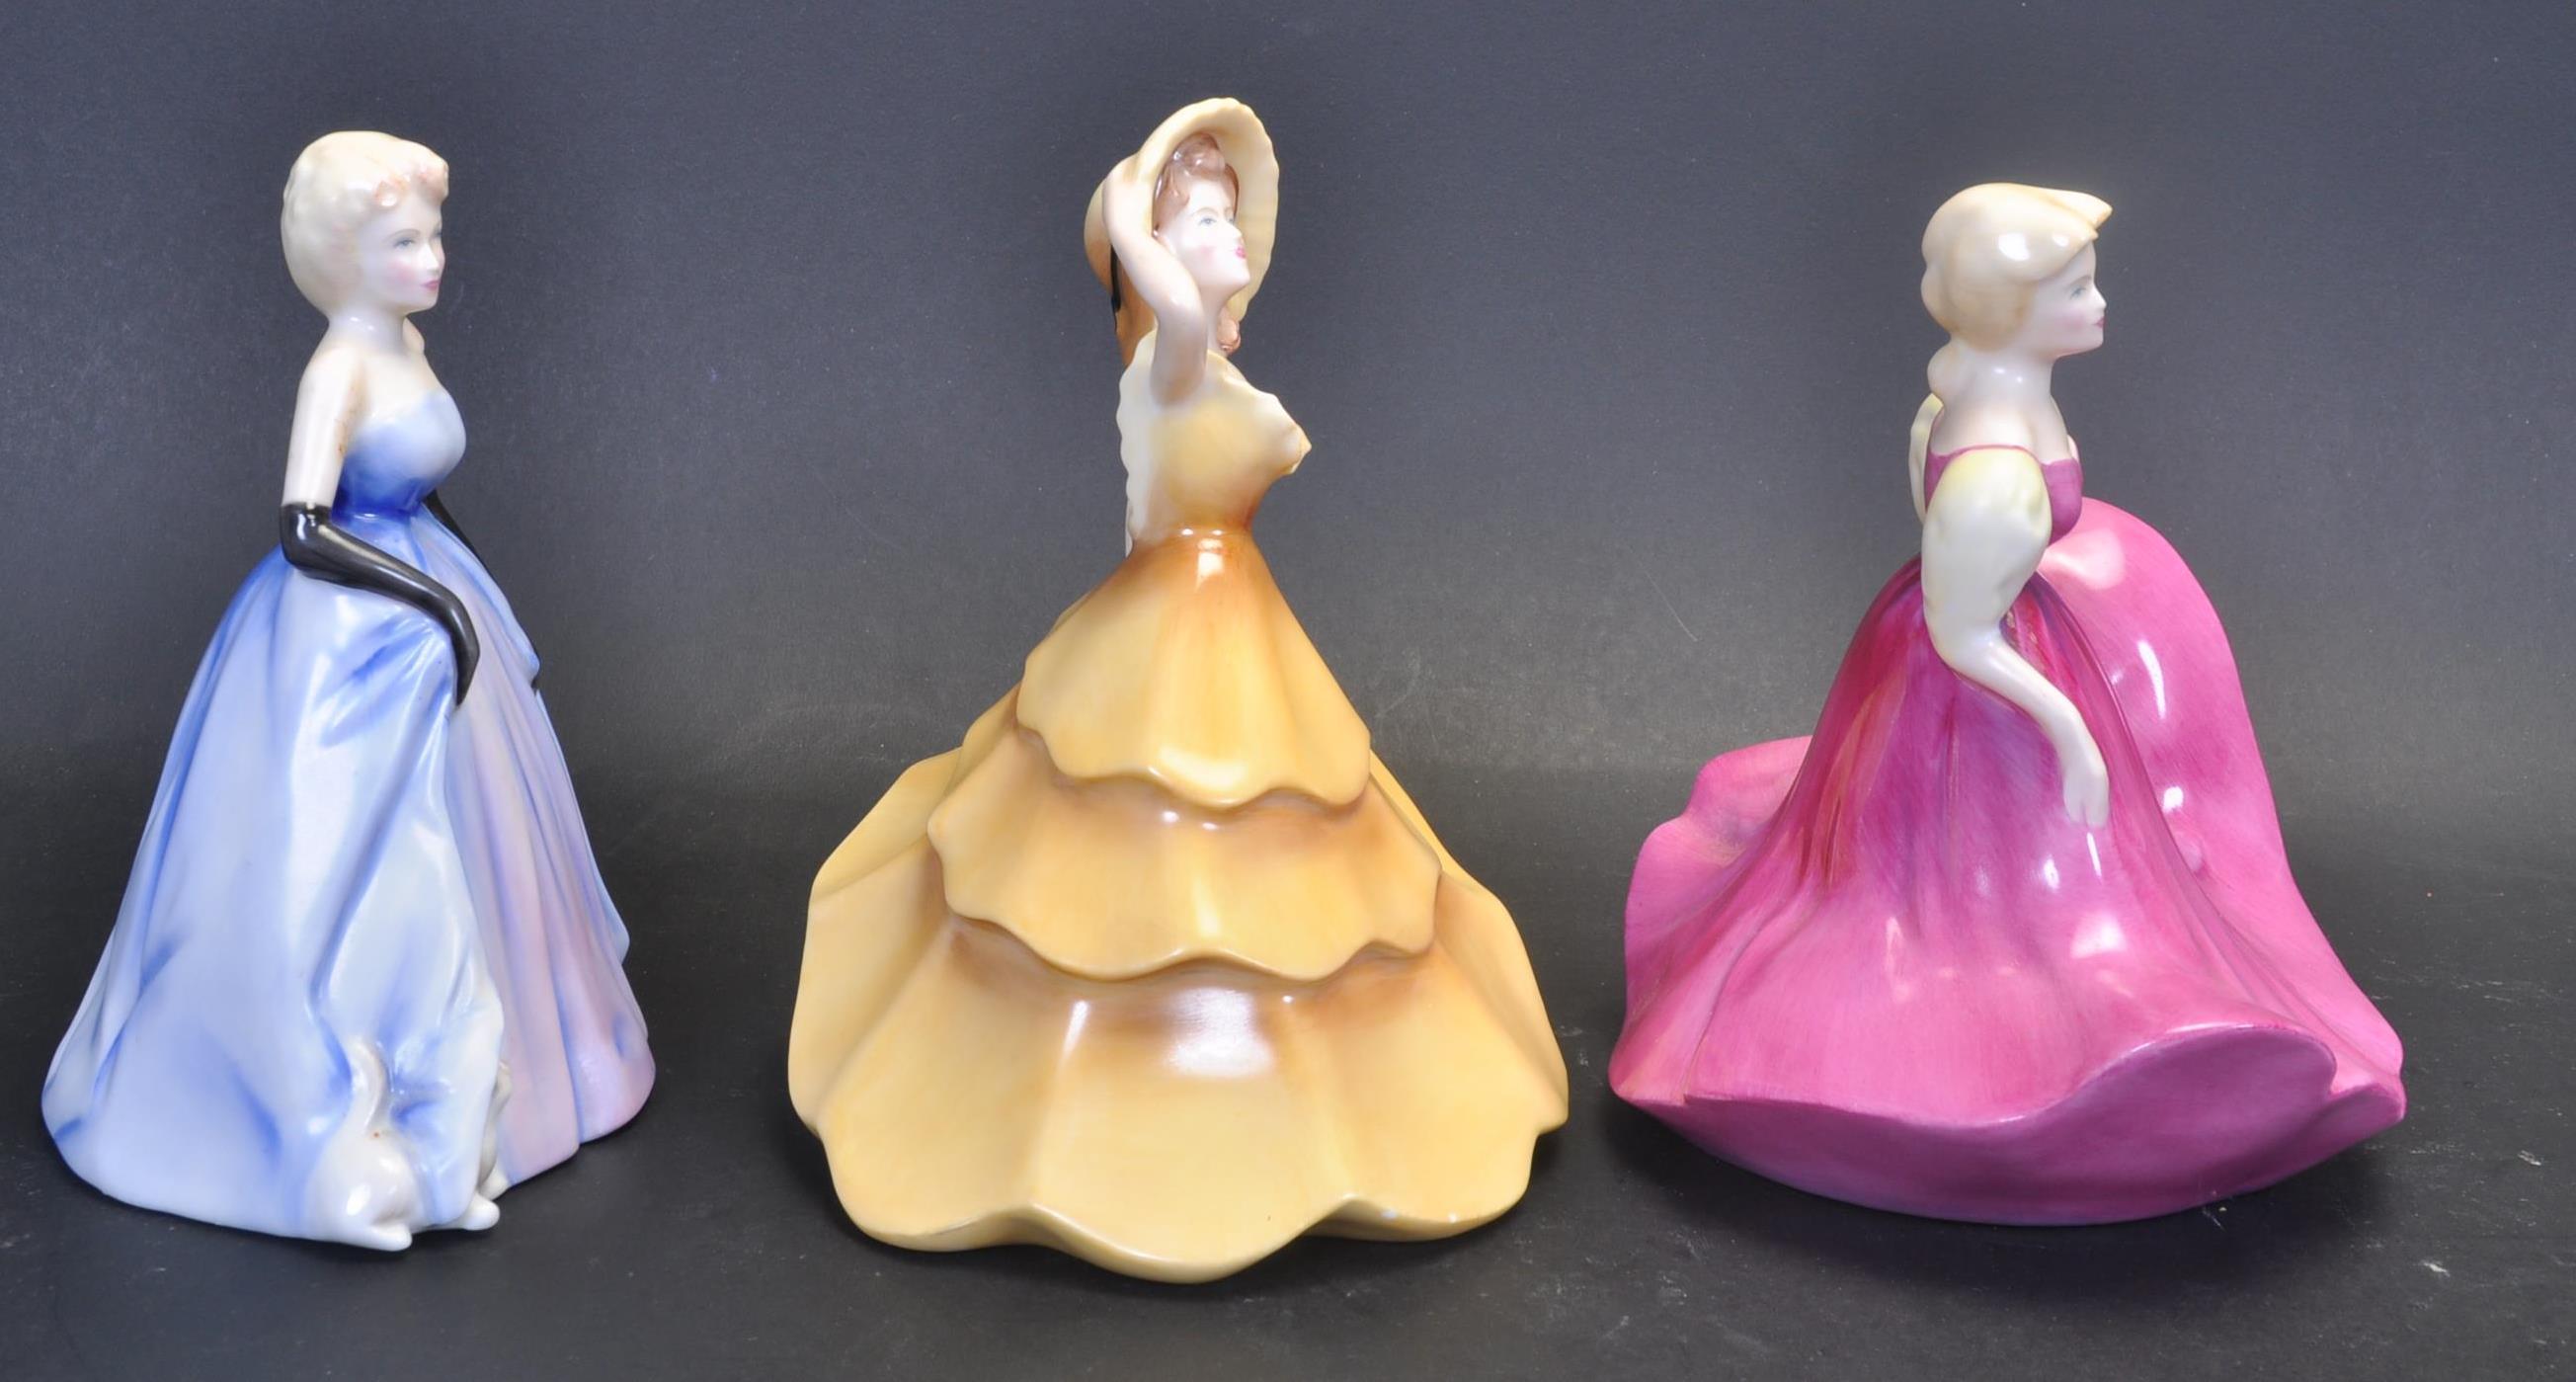 THREE WADE CERAMIC FIGURINES FROM MY FAIR LADIES COLLECTION - Image 2 of 6